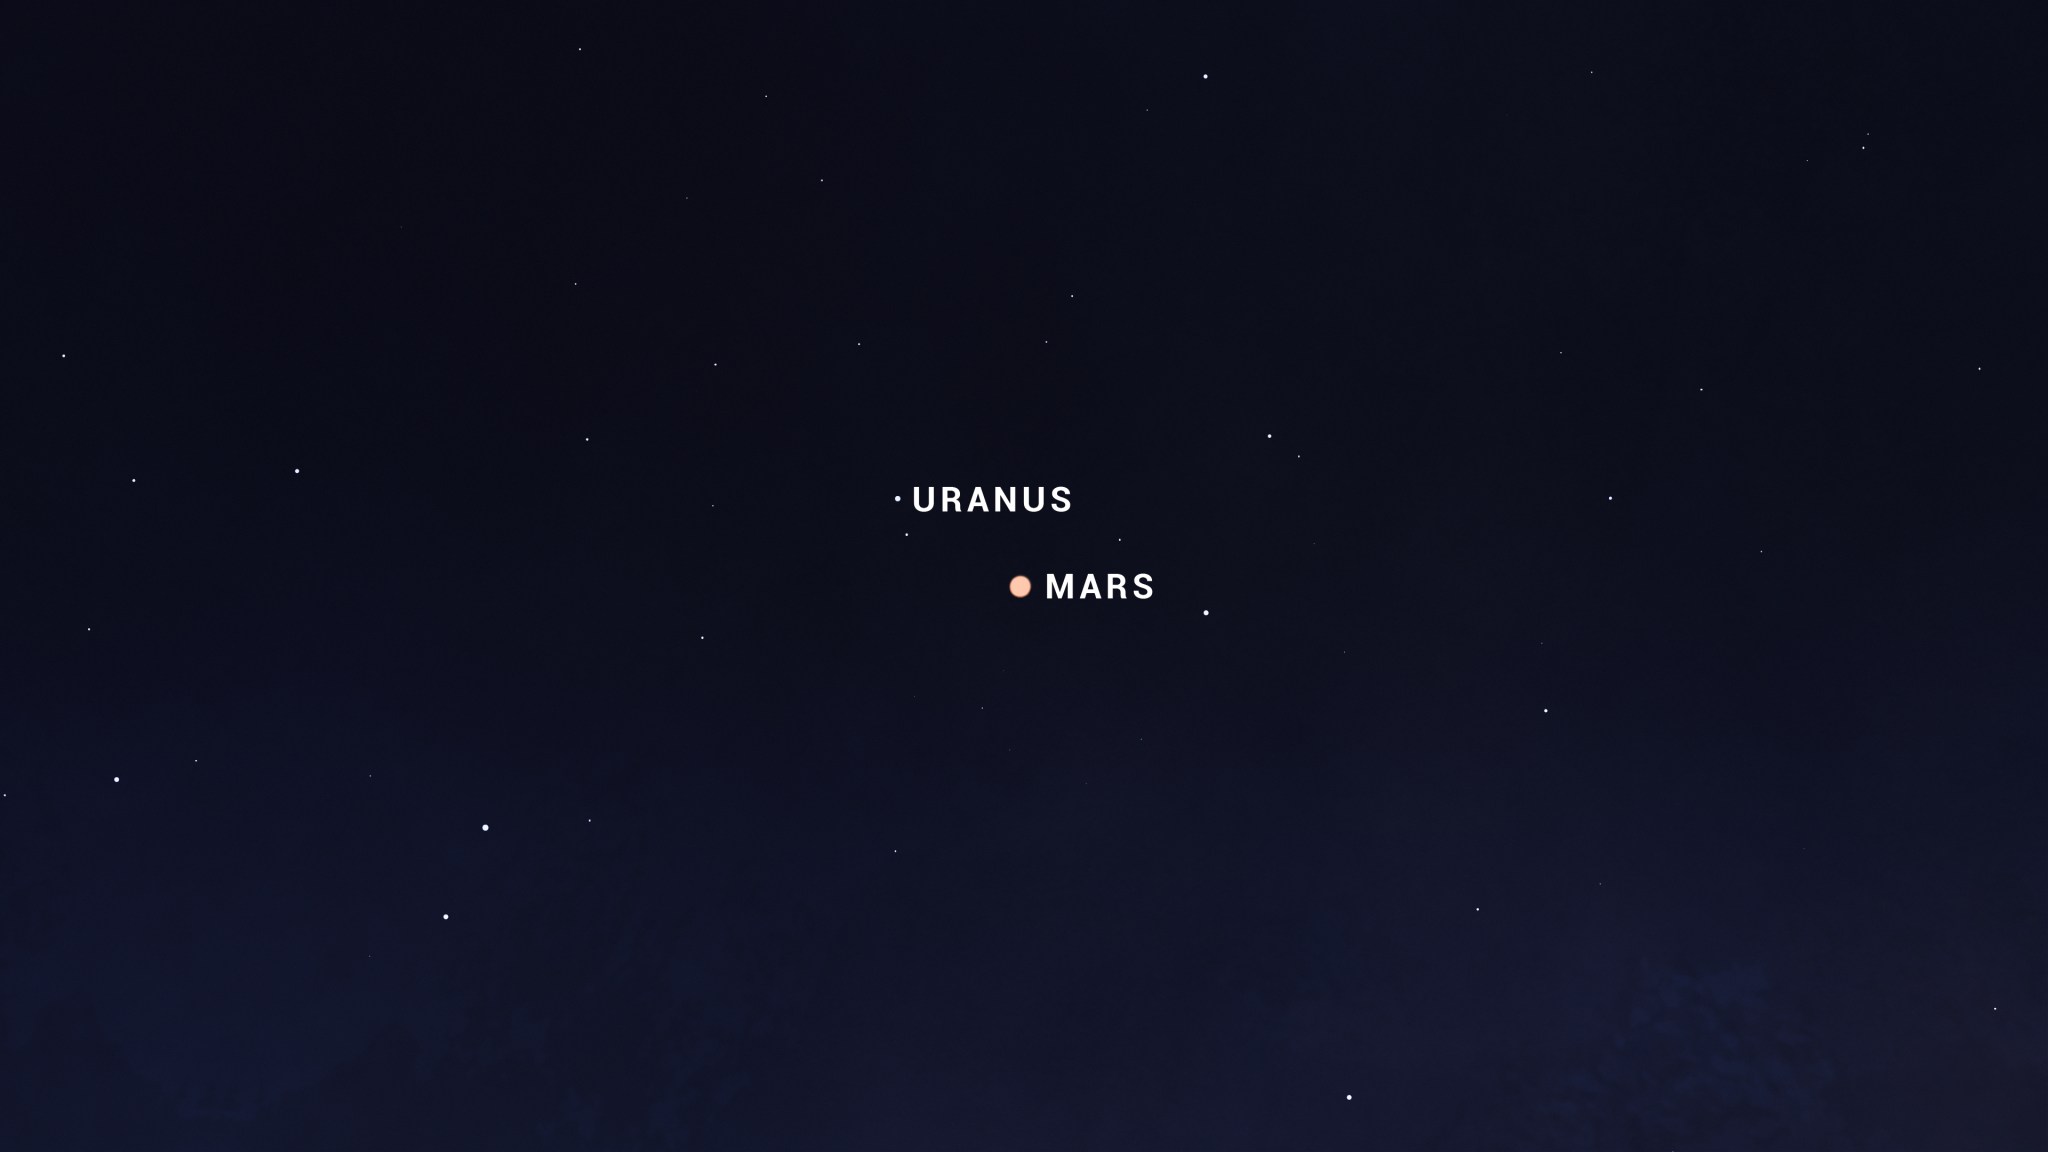 An illustrated sky chart shows a zoomed-in view, like what binoculars would reveal. The planets Mars and Uranus are pictured as small white dots among a handful of stars, with Uranus located at the 10 o'clock position above Mars. Mars is a reddish-colored dot that appears larger than Uranus, due to the former's greater brightness.